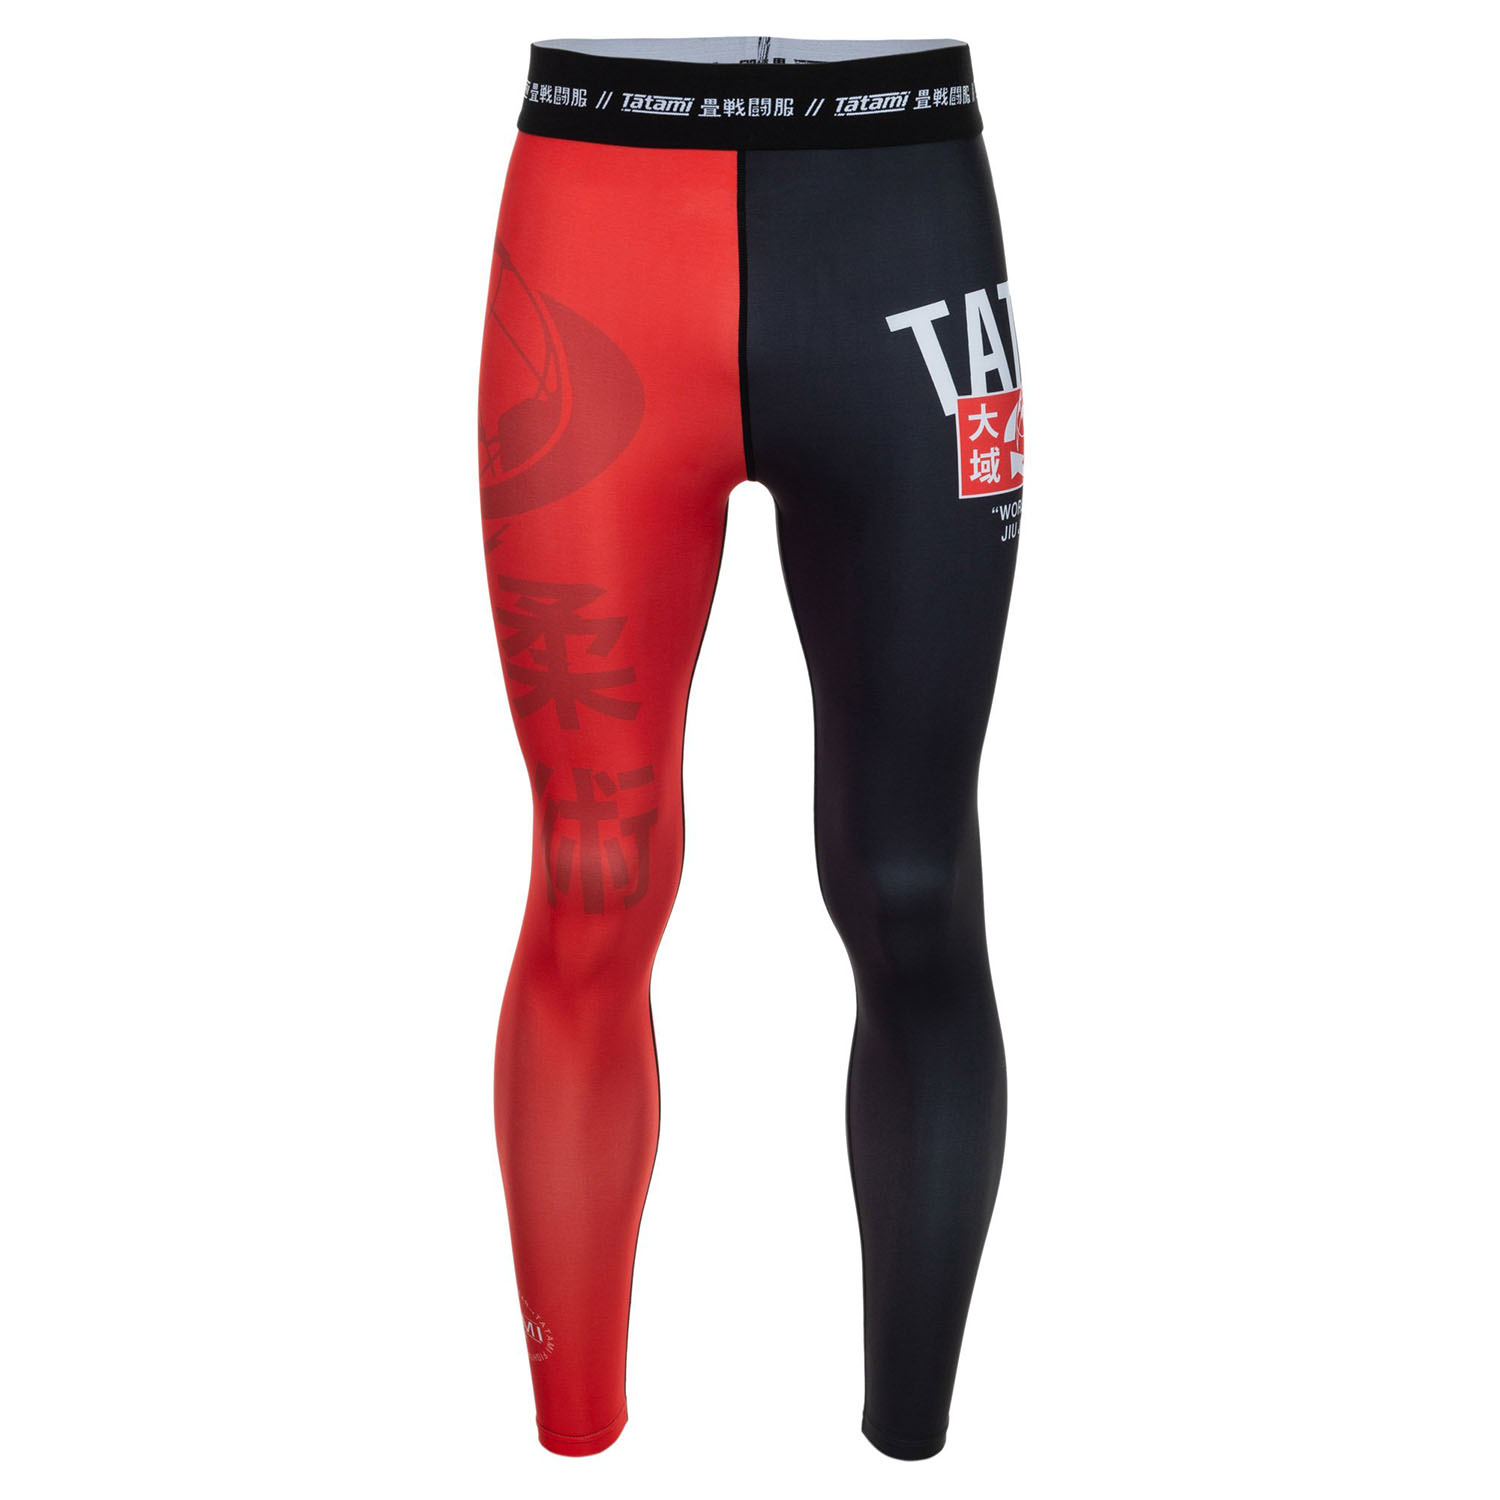 Tatami Compression Pants, Uncover, rot-schwarz